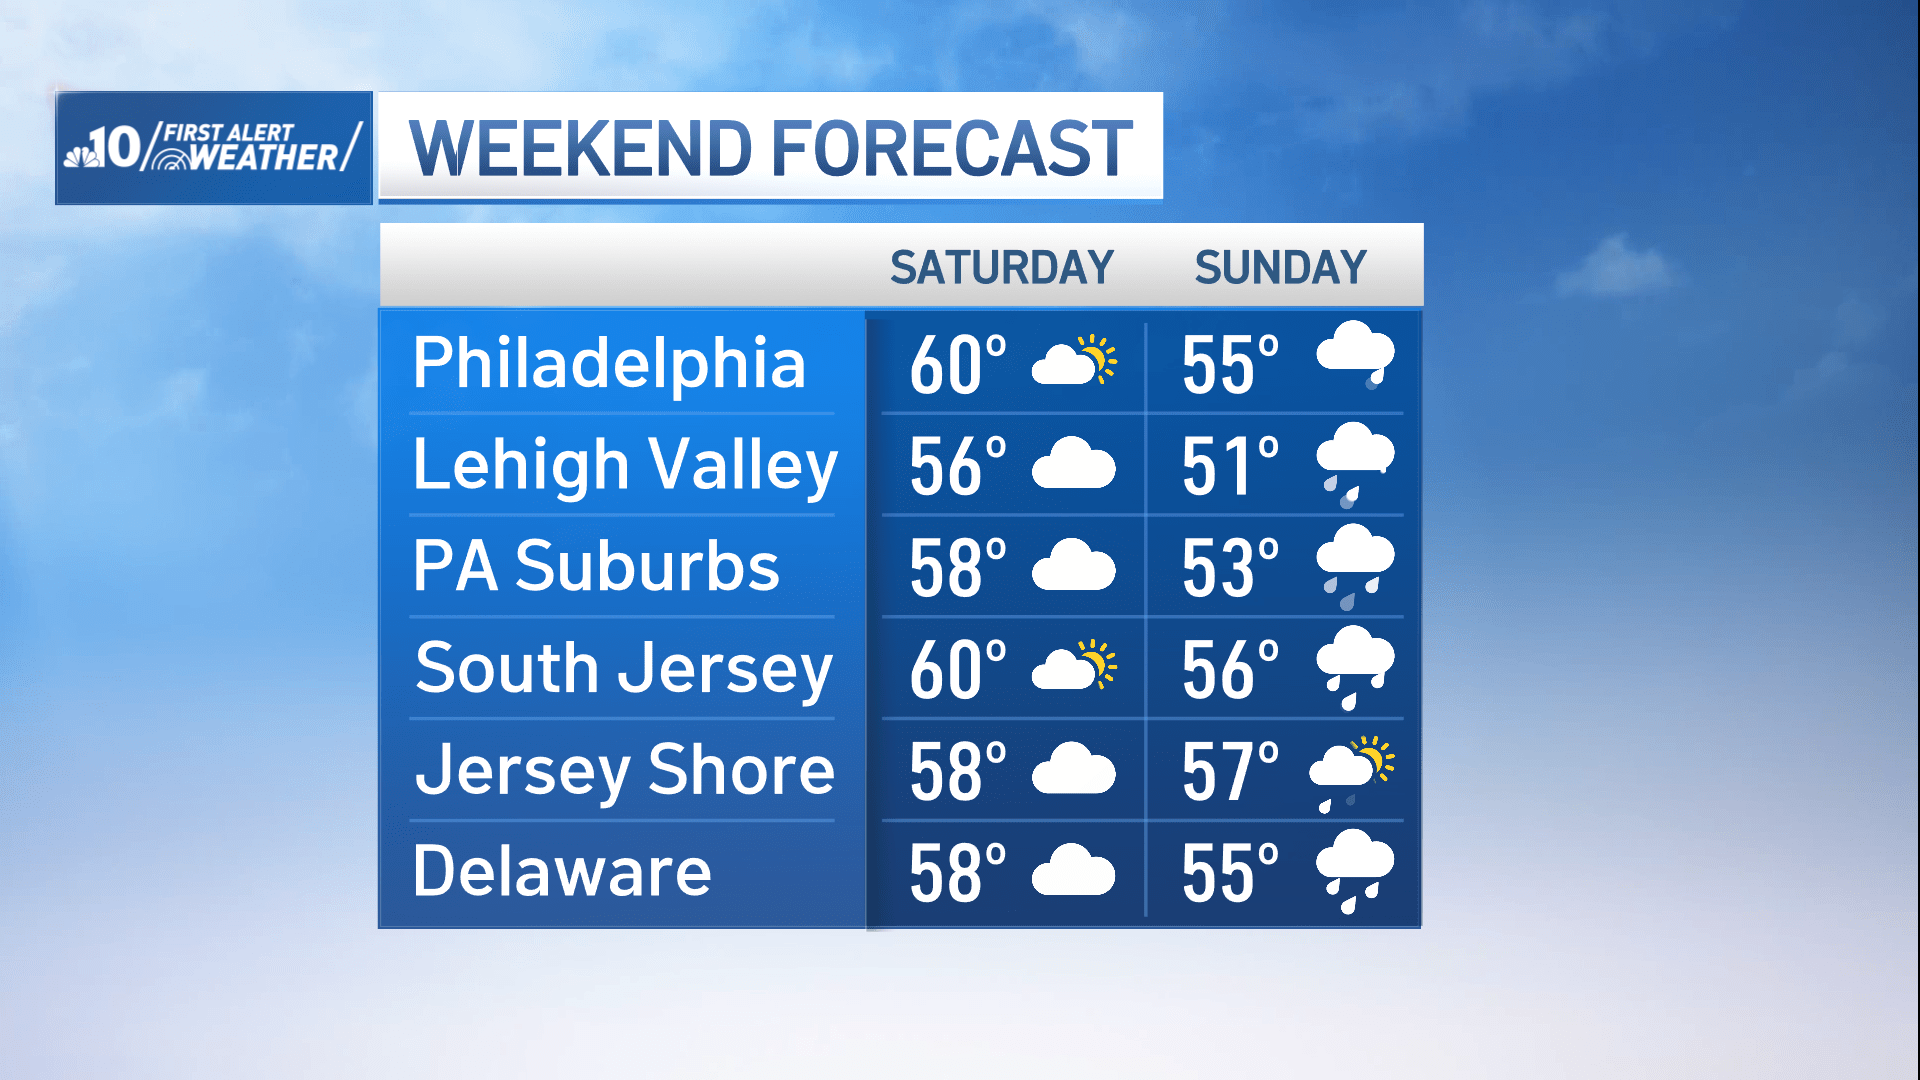 Graphic shows expected weekend weather in Philadelphia region.